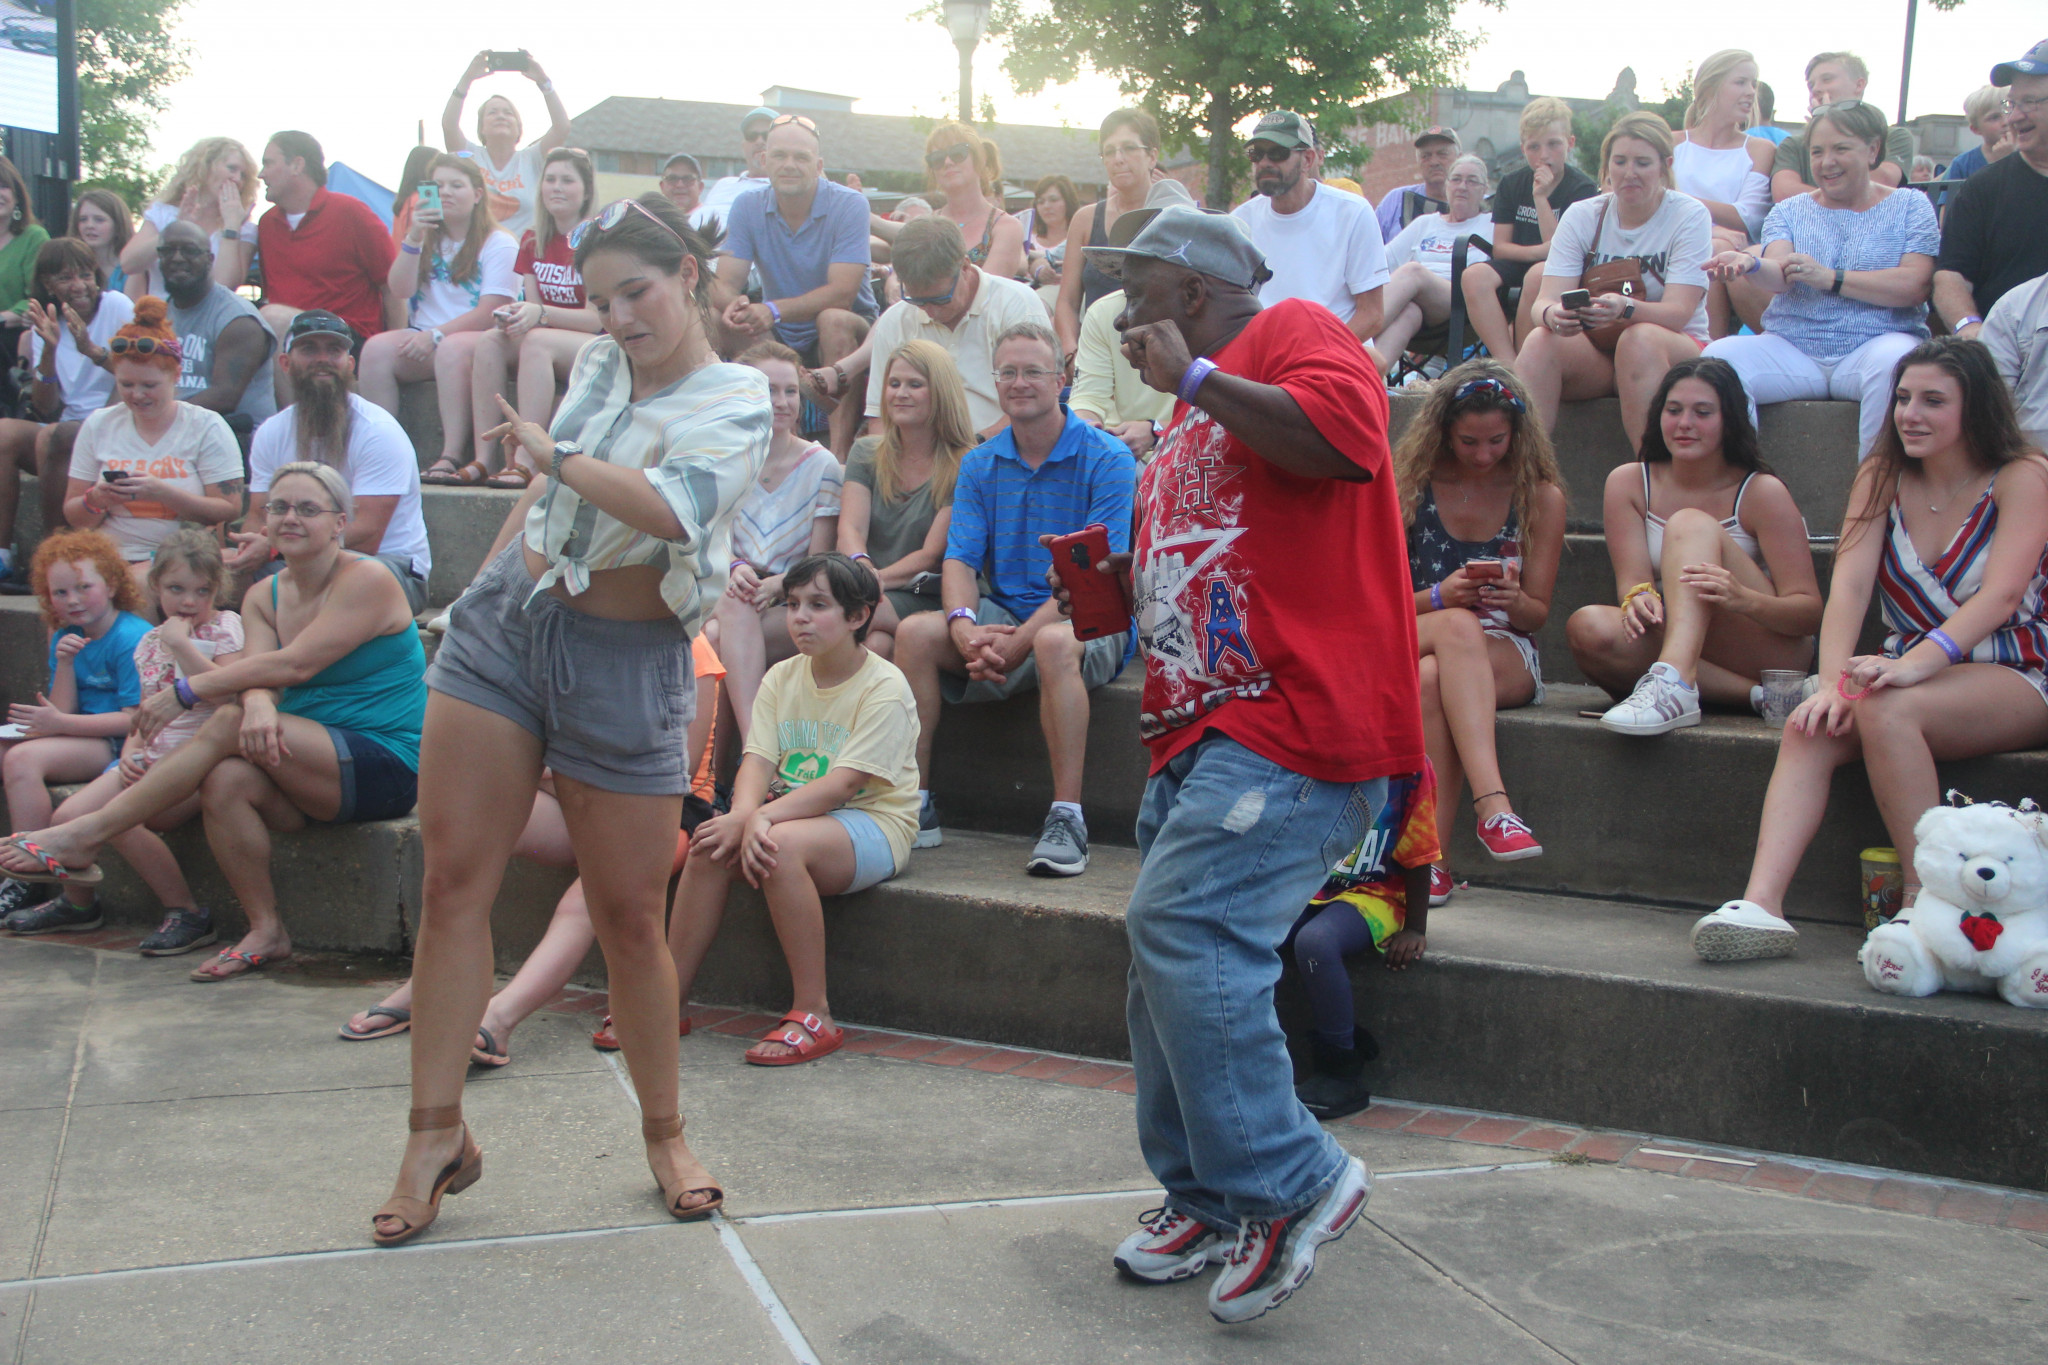 Concertgoers dancing during J.A.M.'s performance